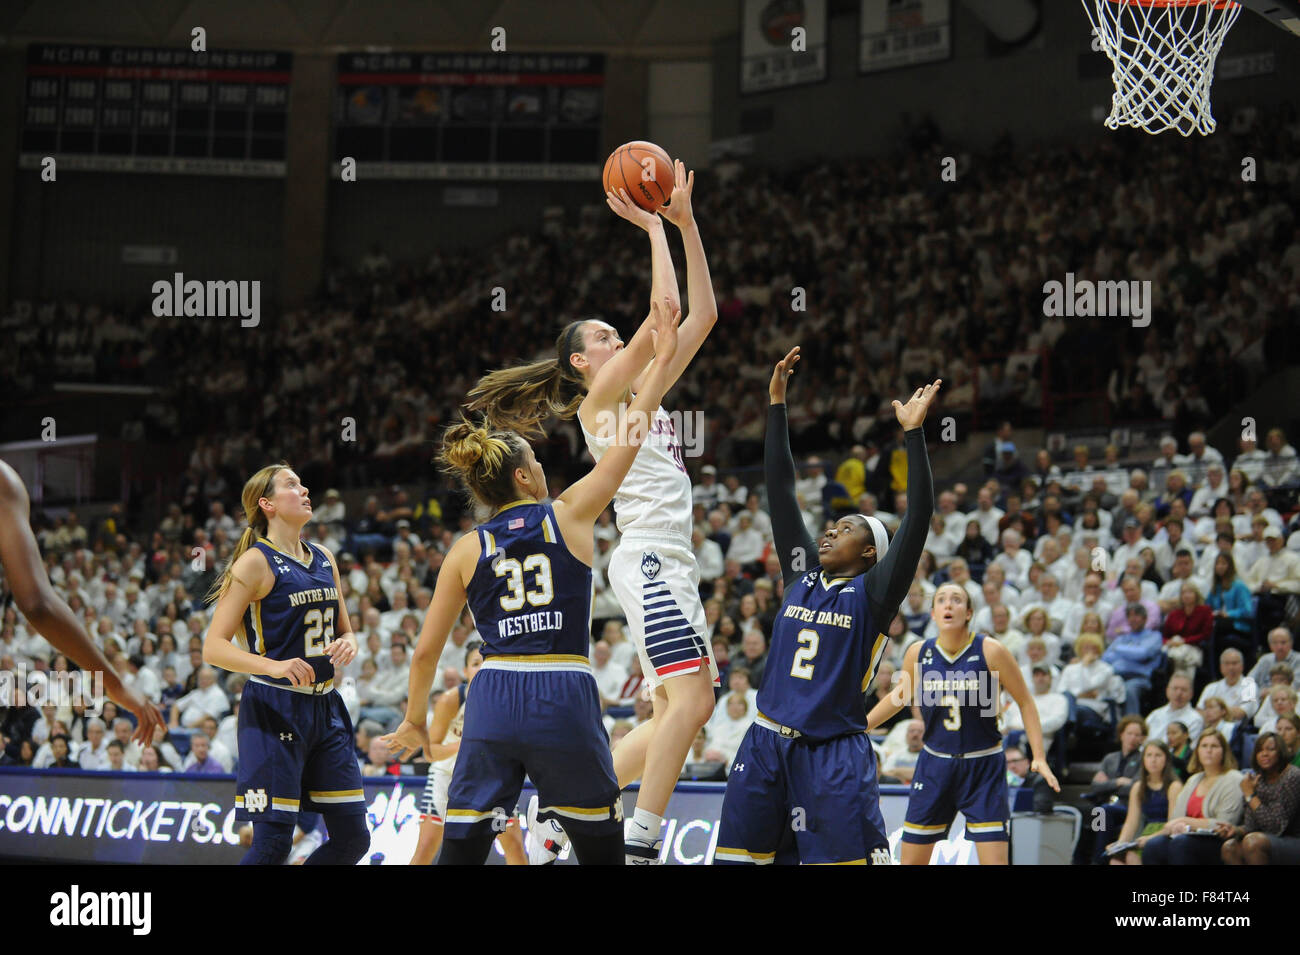 Stores, Connecticut, USA. 5th Dec, 2015. Breanna Stewart (30) of Uconn in action during a game against the Notre Dame Fighting Irish at Gampel Pavilion in Stores, Connecticut. Gregory Vasil/Cal Sport Media/Alamy Live News Stock Photo